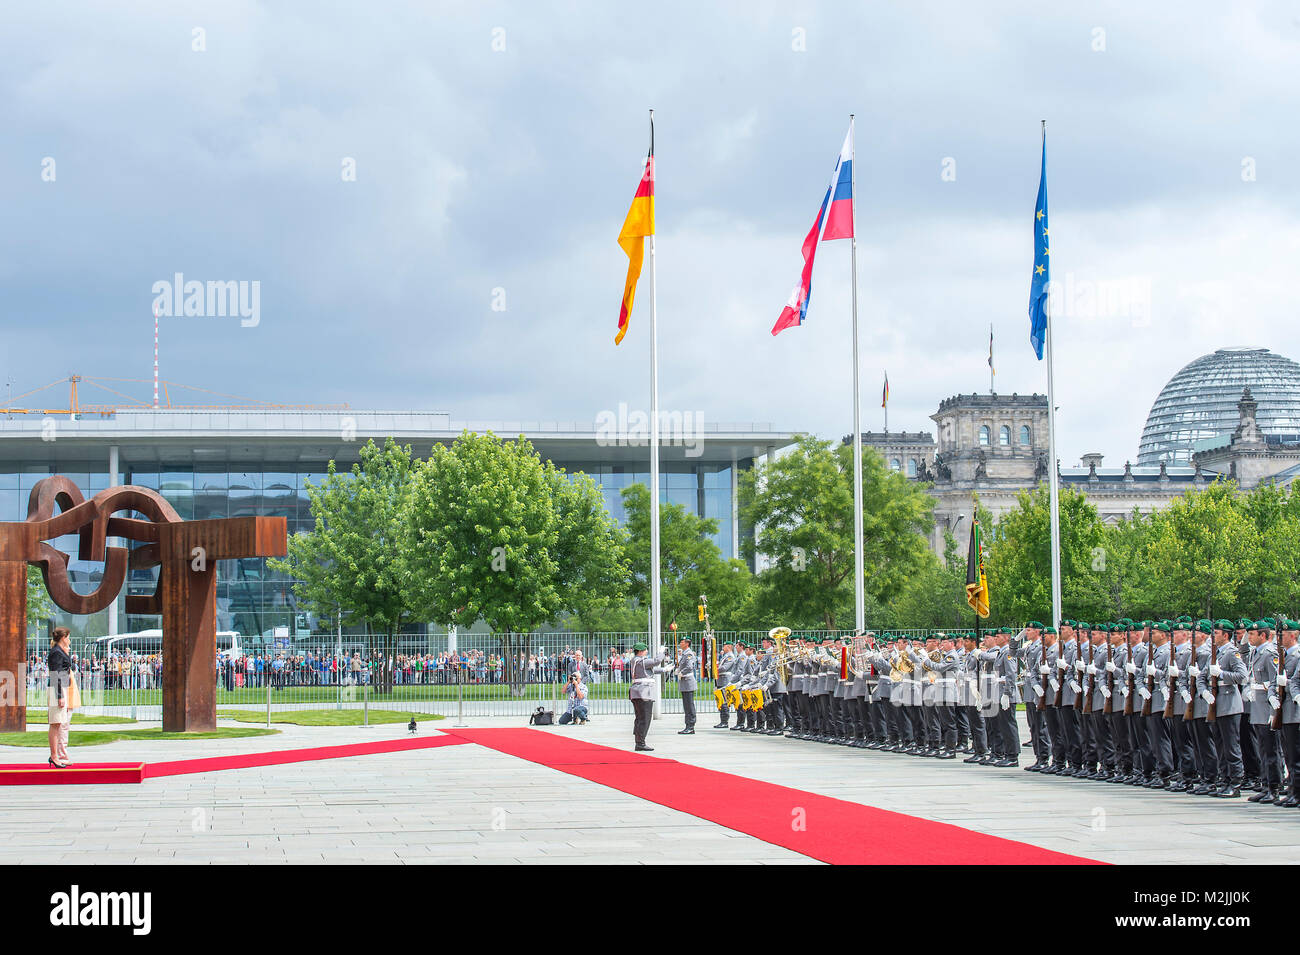 Federal Chancellor Angela Merkel receives the Prime Minister of the Republic of Slovenia, Alenka Bratušek with military honors in the German Chancellery. Stock Photo